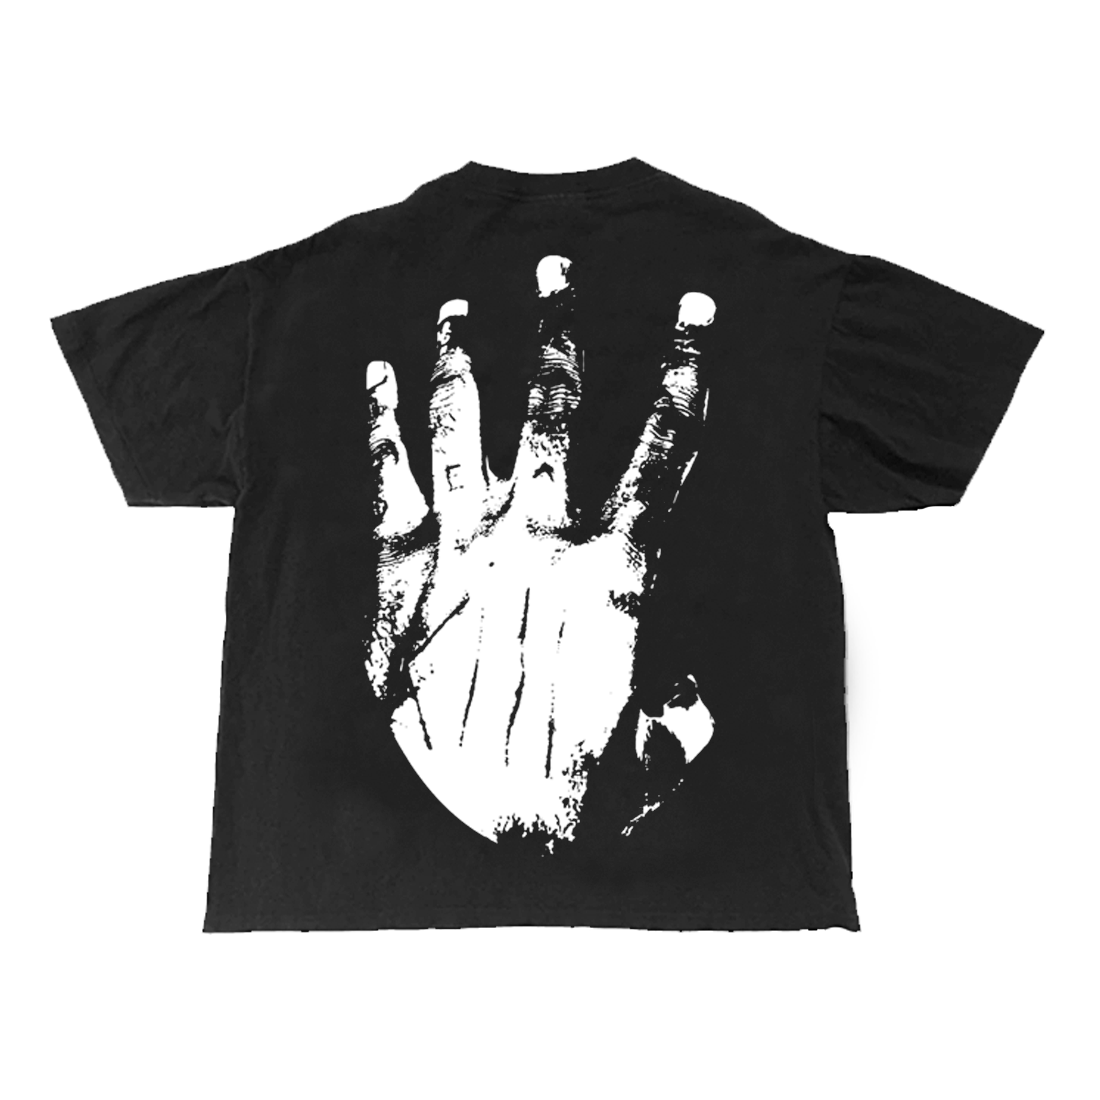 Black 'Look At Me T-shirt' screen printed back graphic white hand